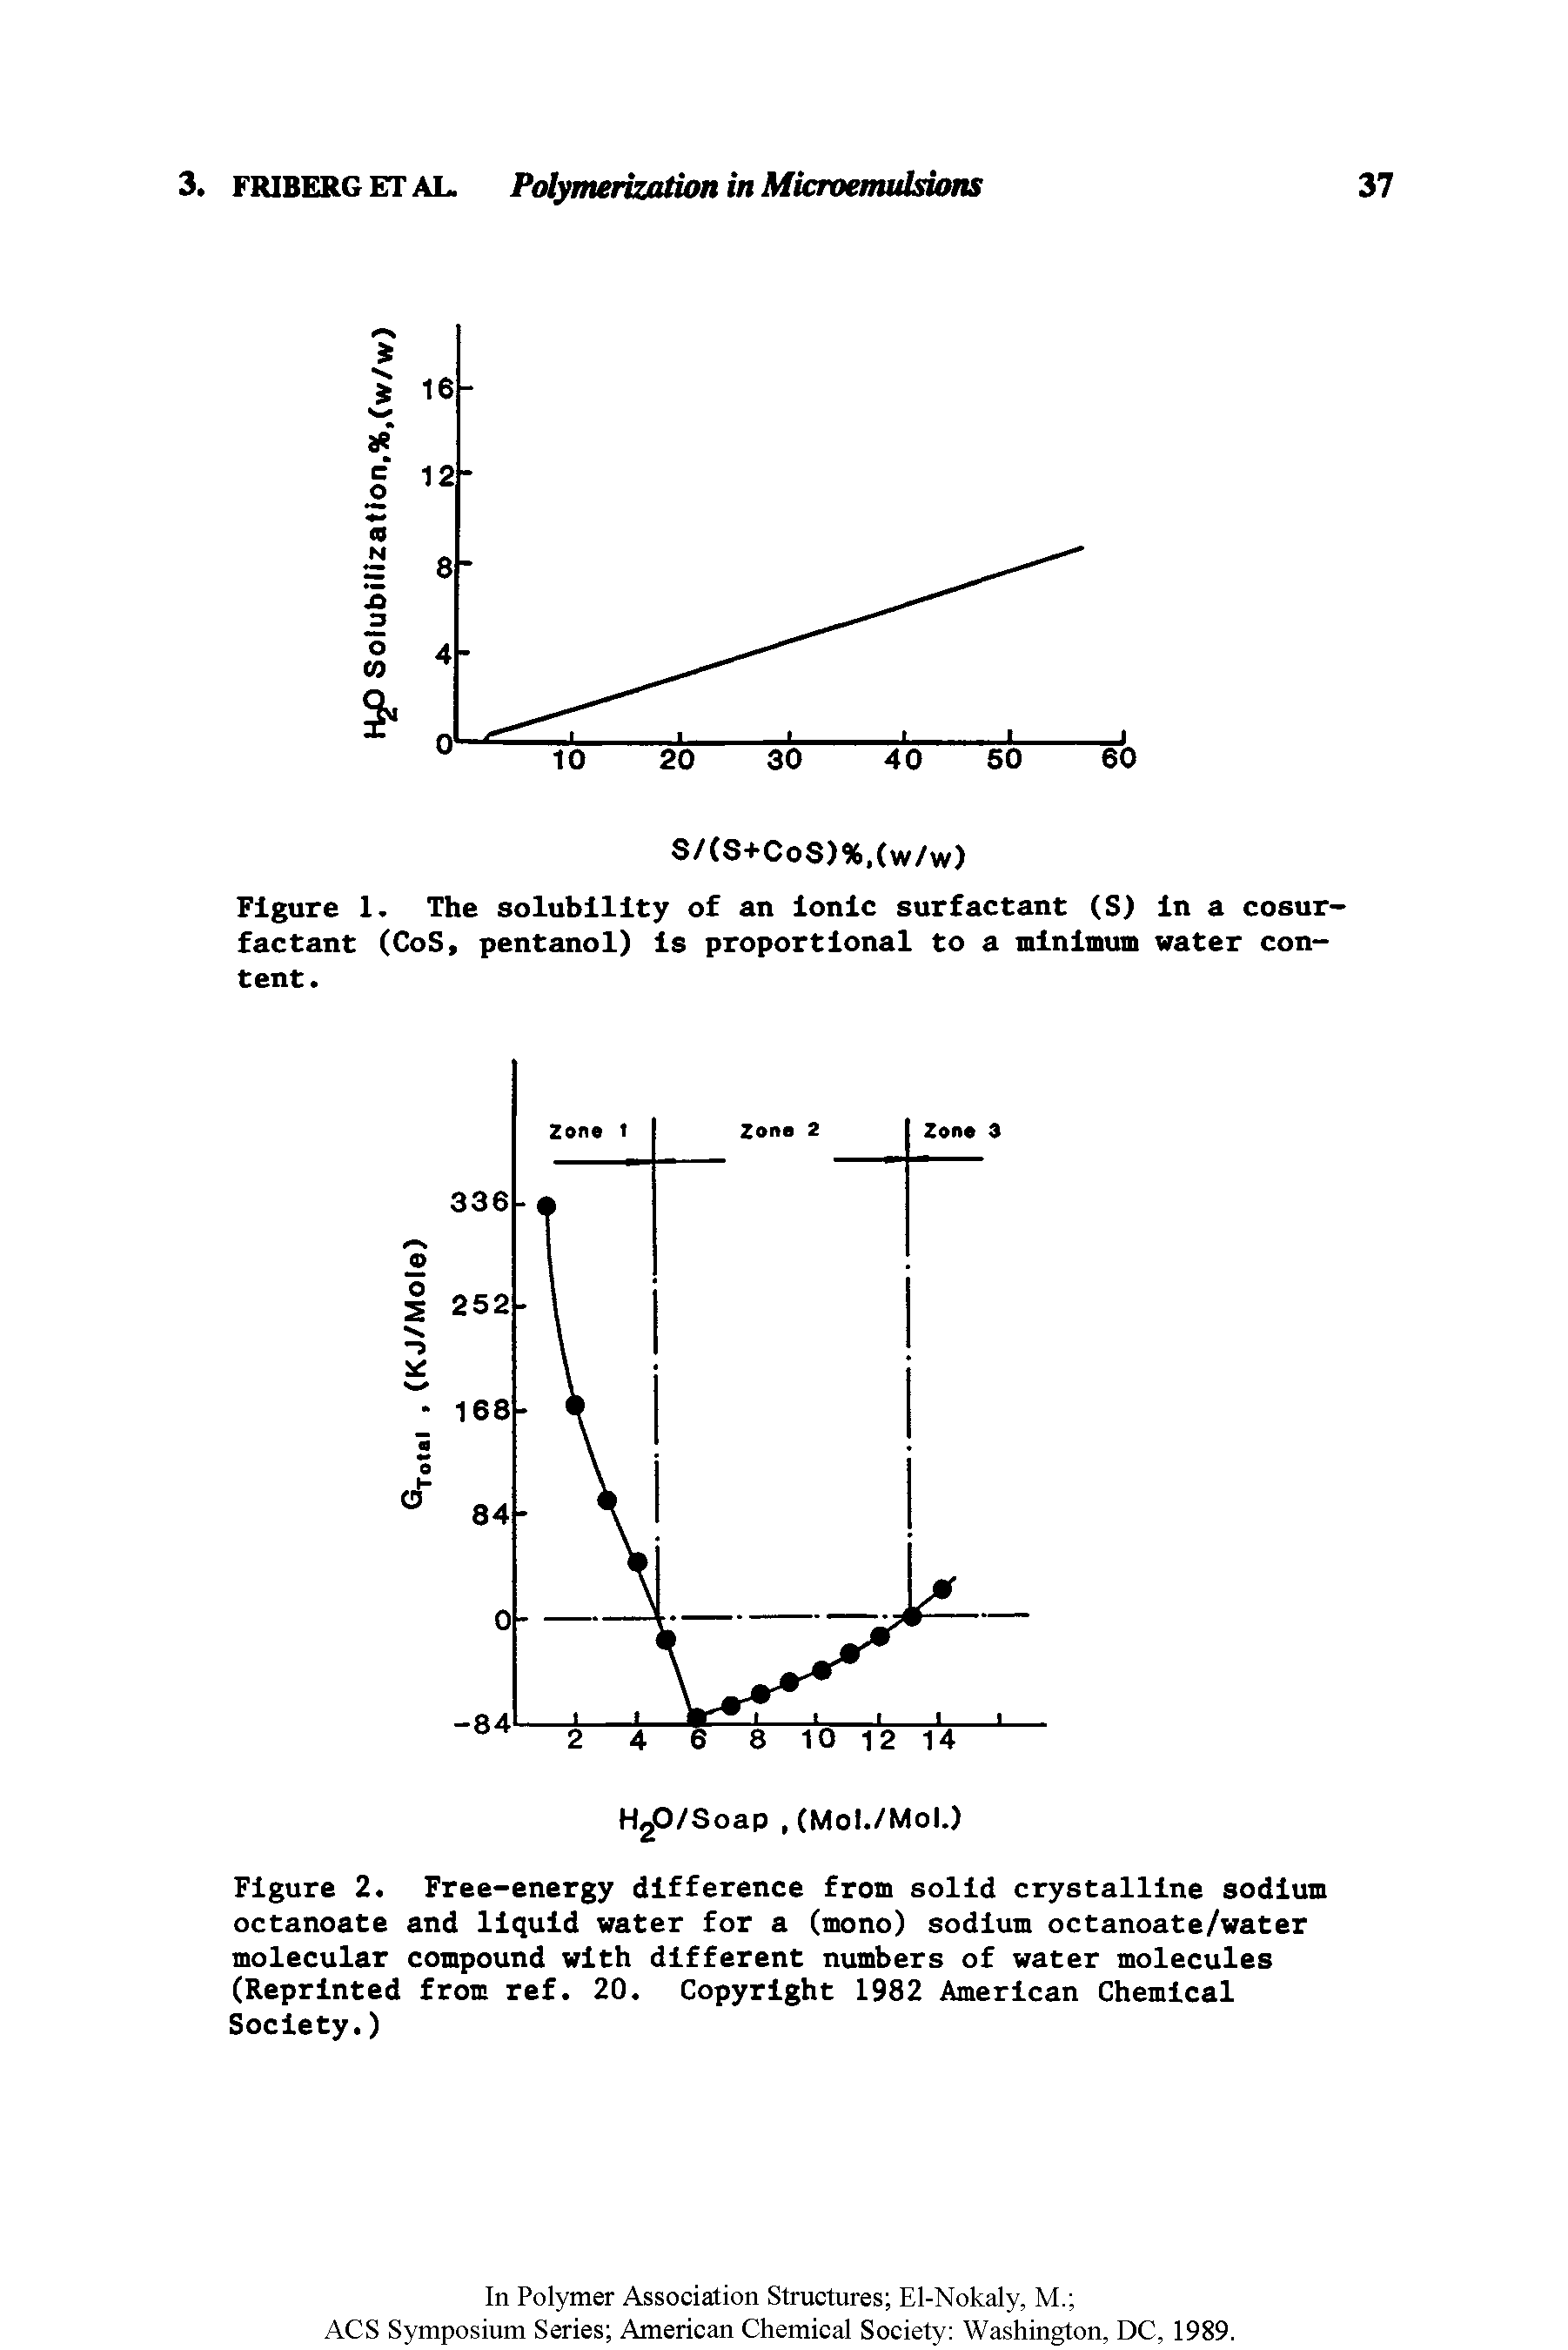 Figure 2. Free-energy difference from solid crystalline sodium octanoate and liquid water for a (mono) sodium octanoate/water molecular compound with different numbers of water molecules (Reprinted from ref. 20. Copyright 1982 American Chemical Society.)...